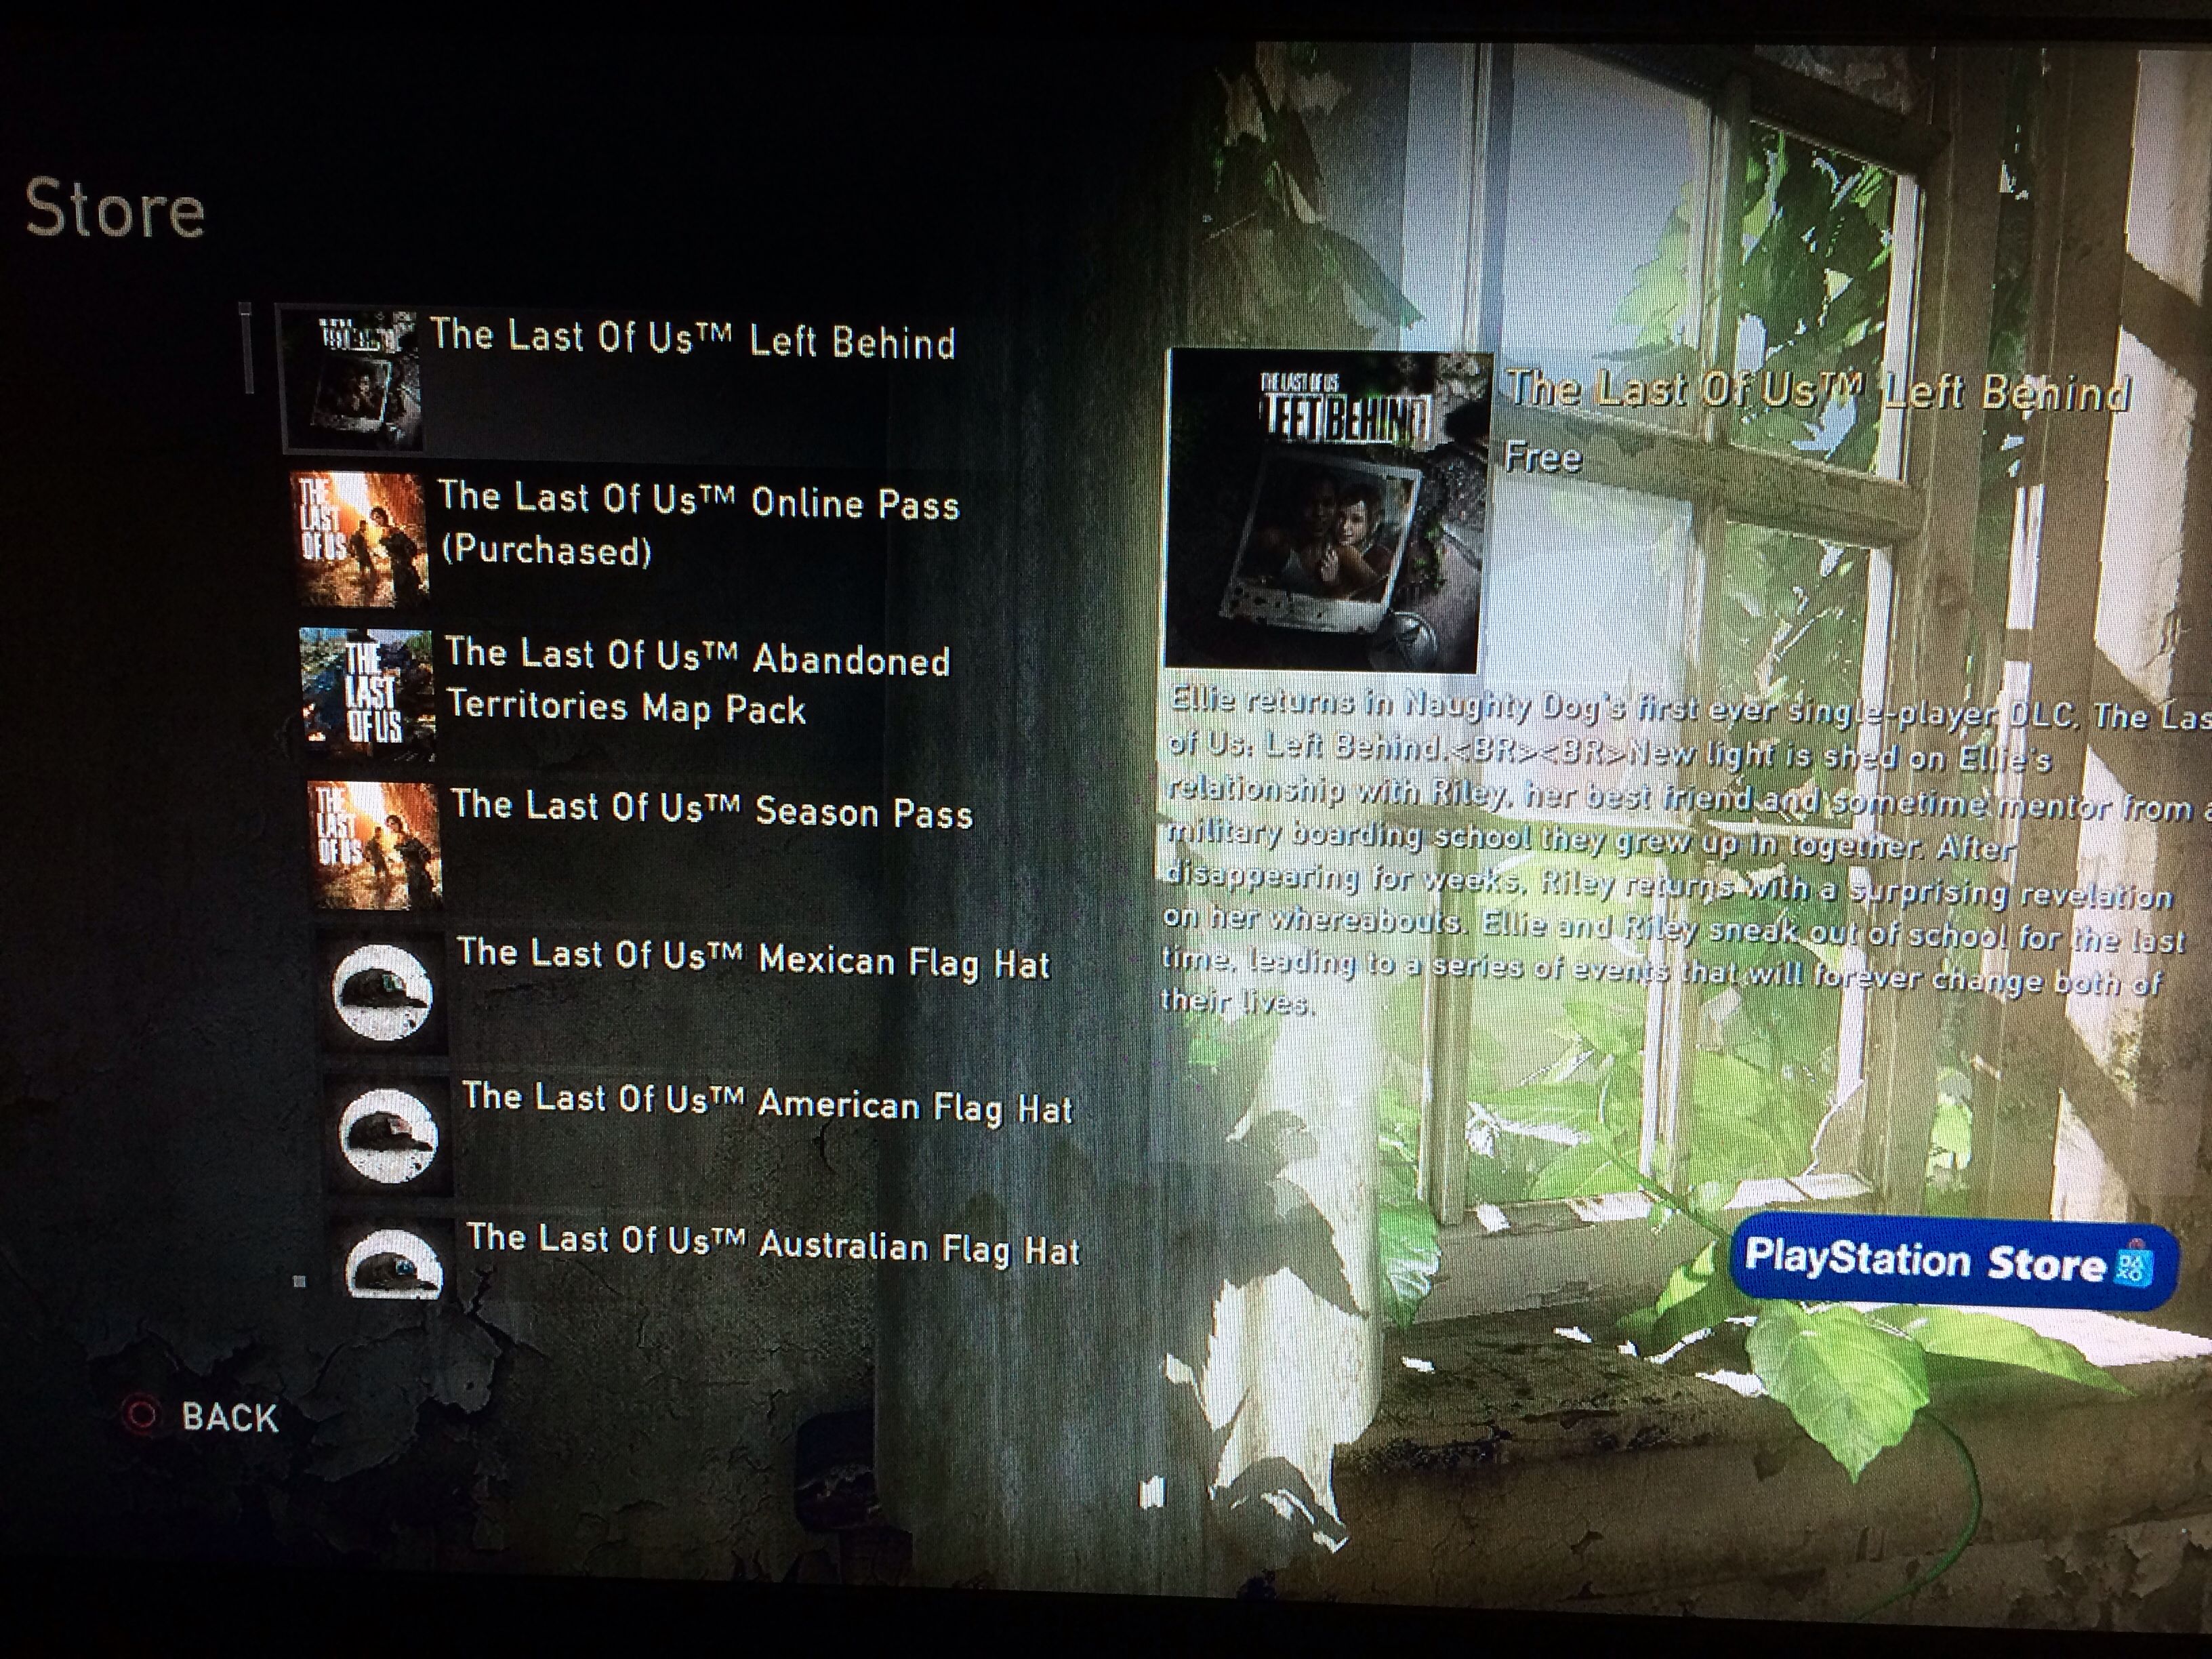 I recently downloaded The Last of us (PS3) from my pc then